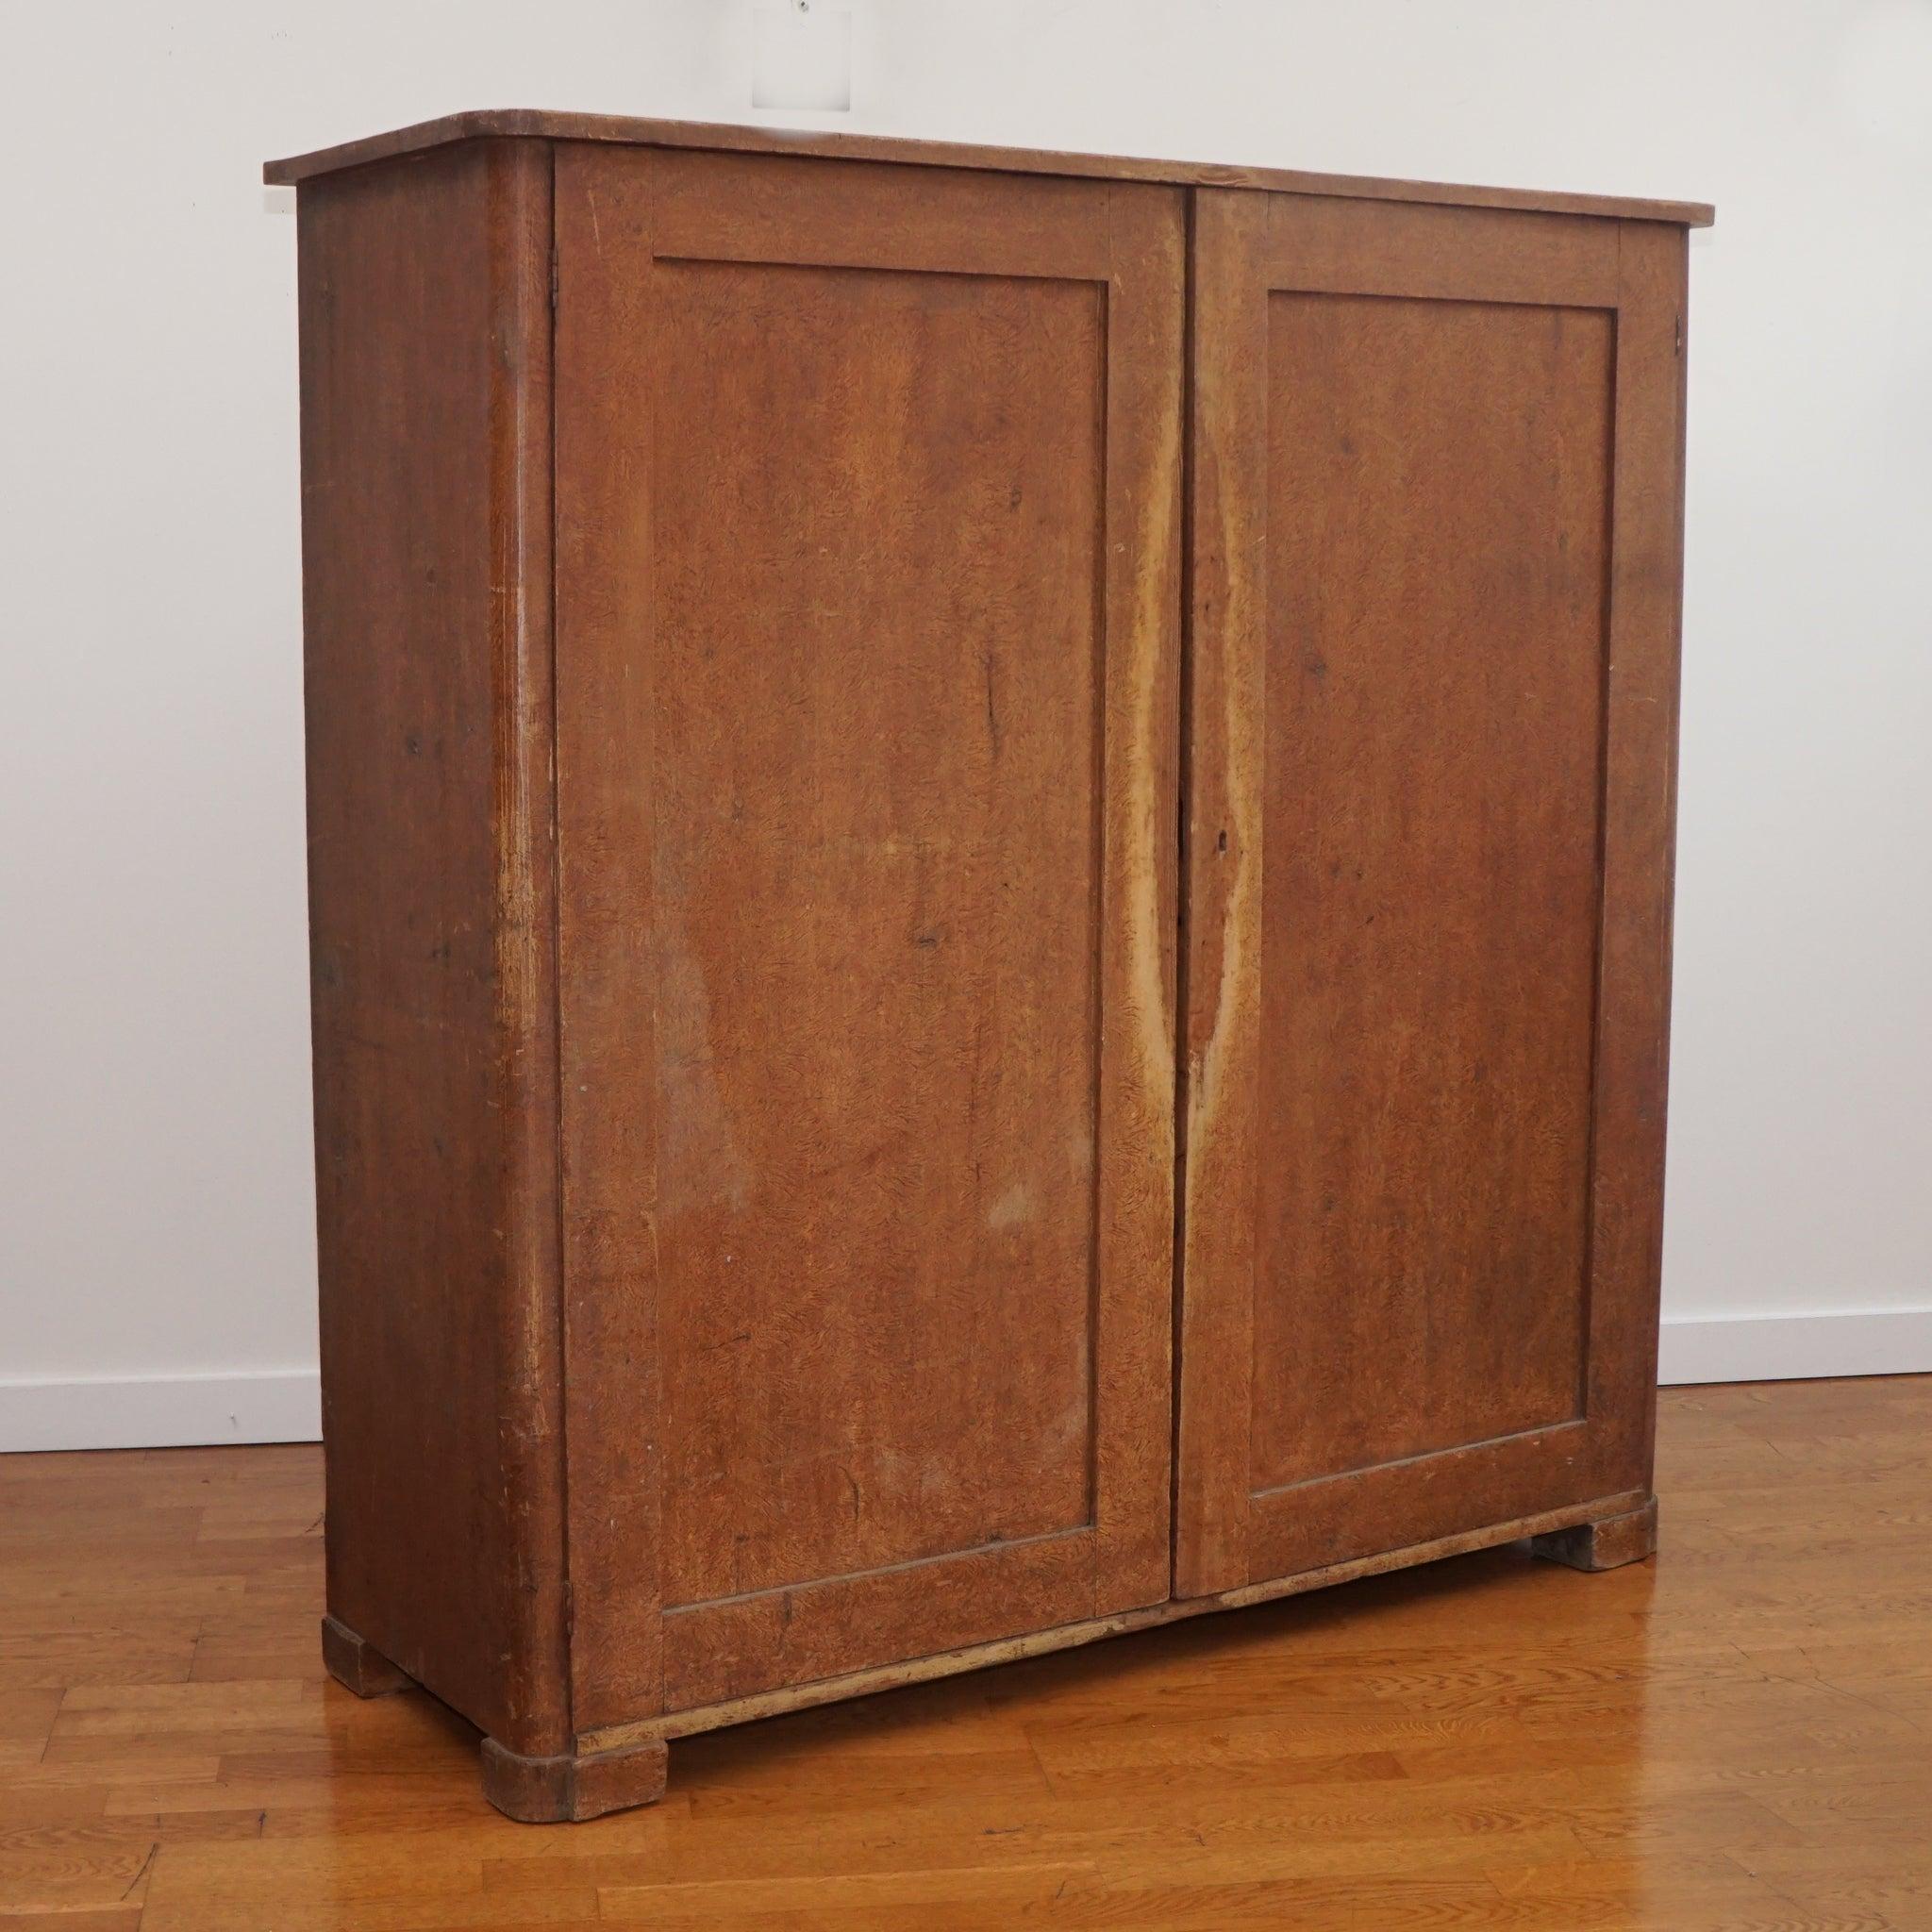 The antique Swedish cabinet, shown here, maintains its original grain-painted finish and displays a beautiful well-worn patina. Two doors open to six interior shelves. This is a simple cabinet that makes a big statement.